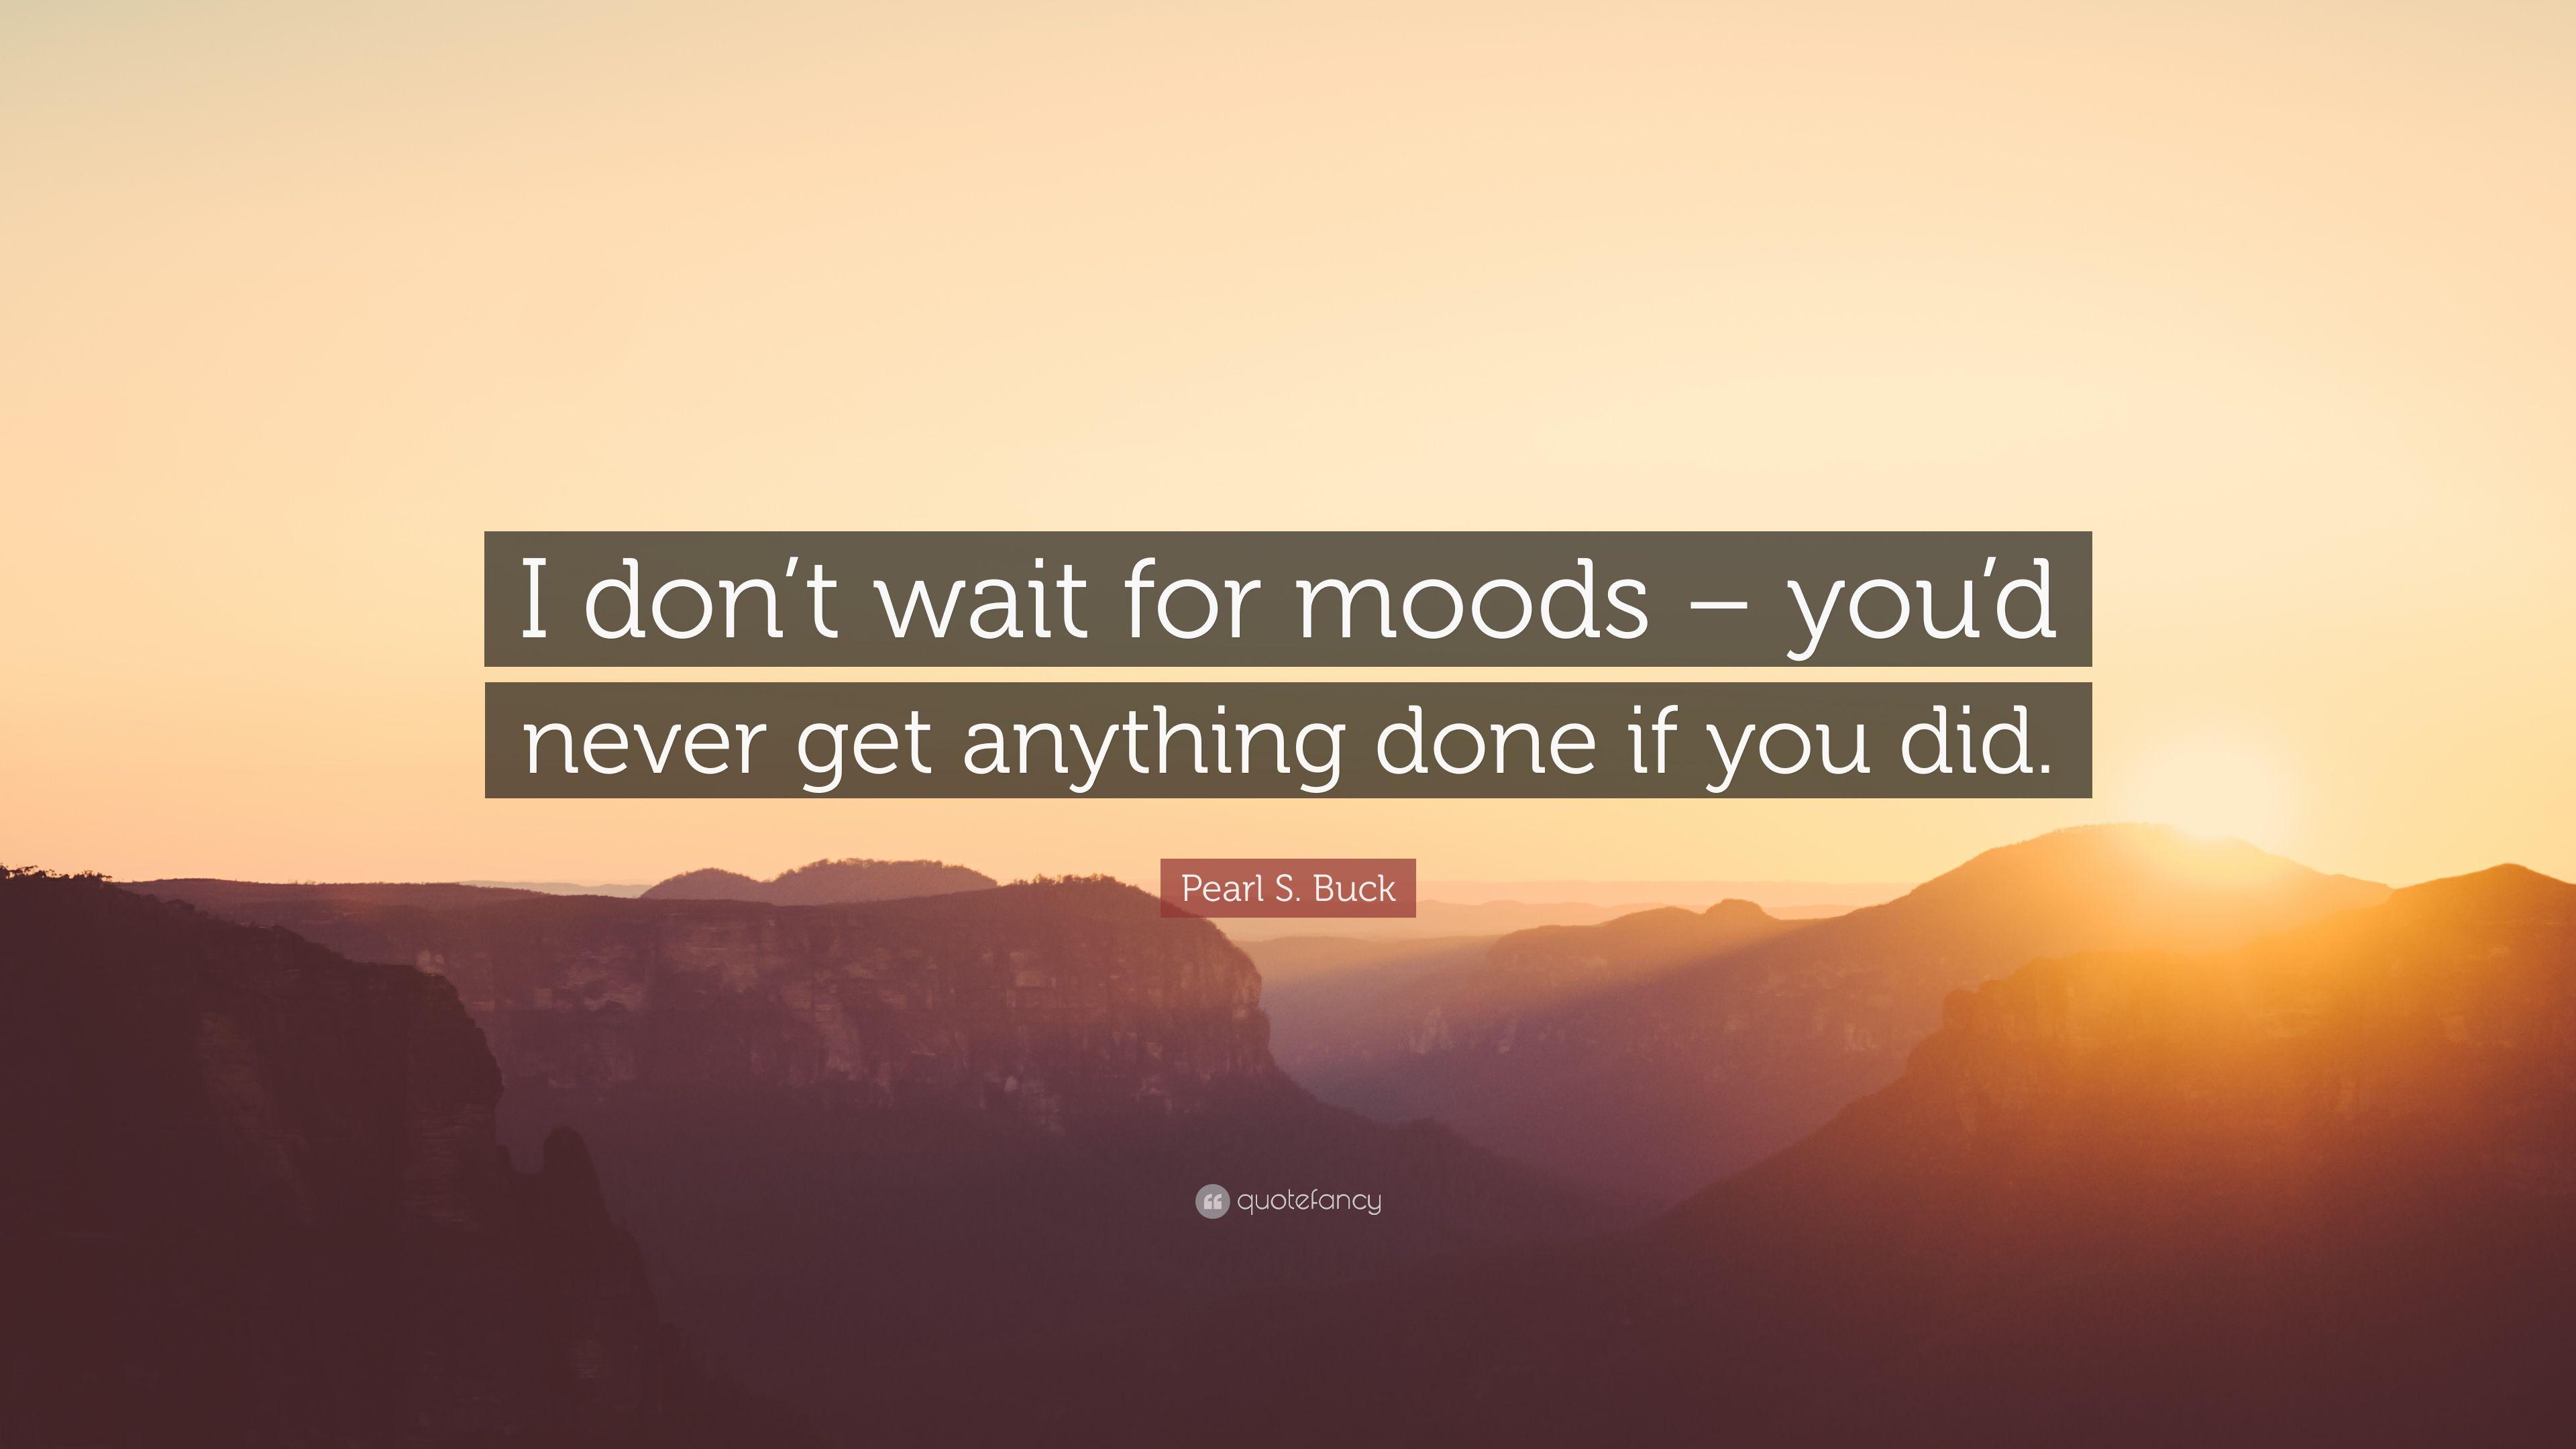 Pearl S. Buck Quote: “I don't wait for moods